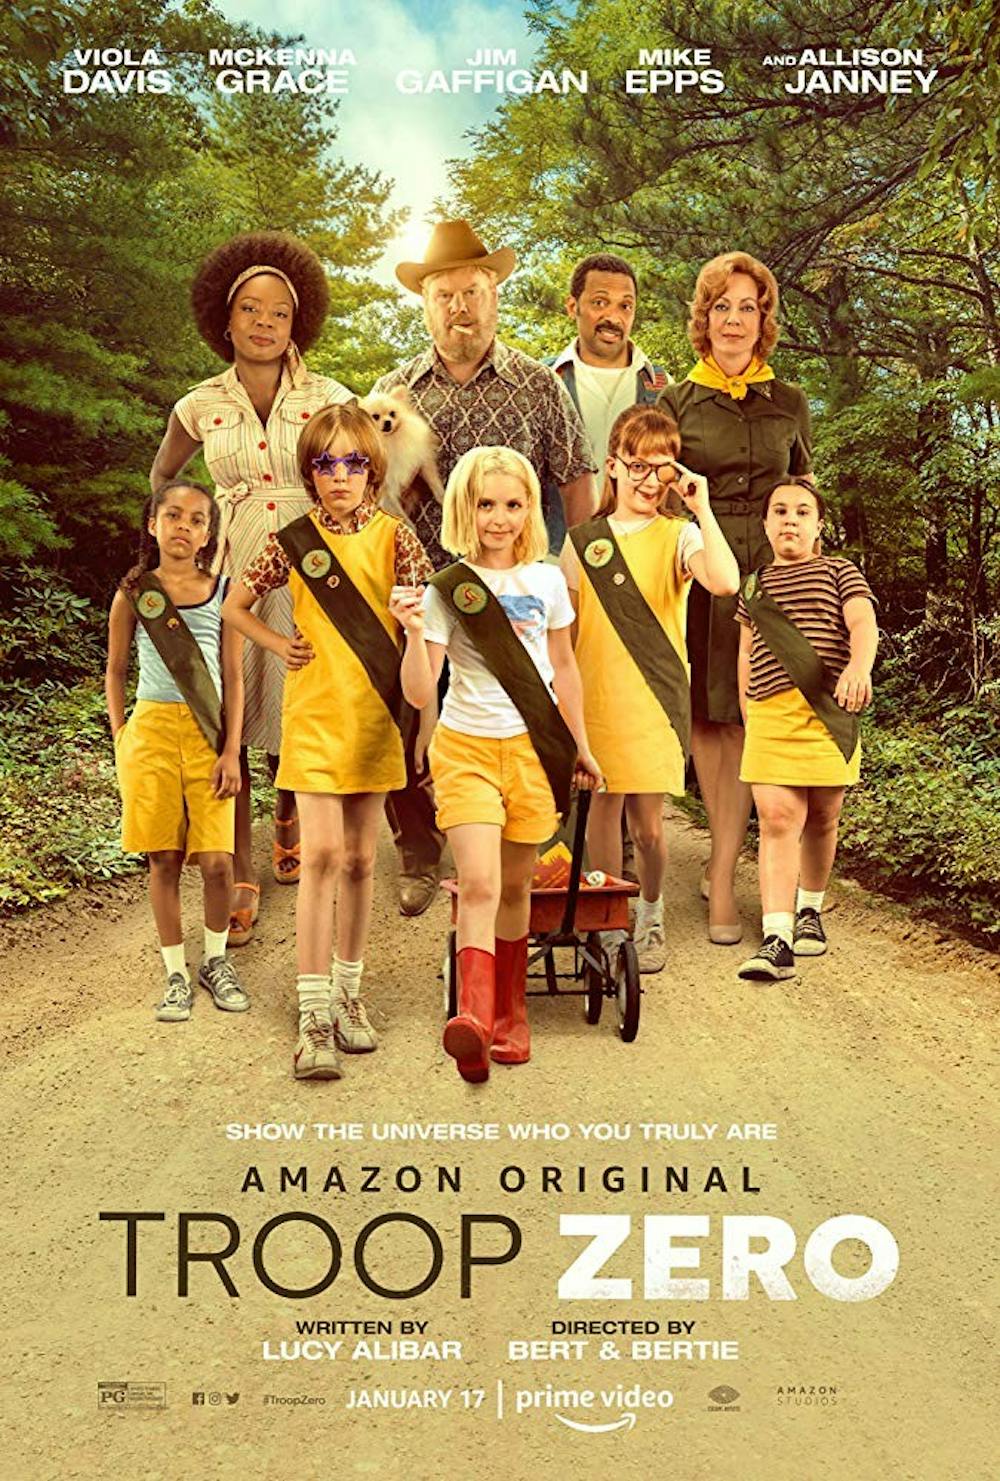 Review: "Troop Zero" comedically shows the intricacies of childhood friendship